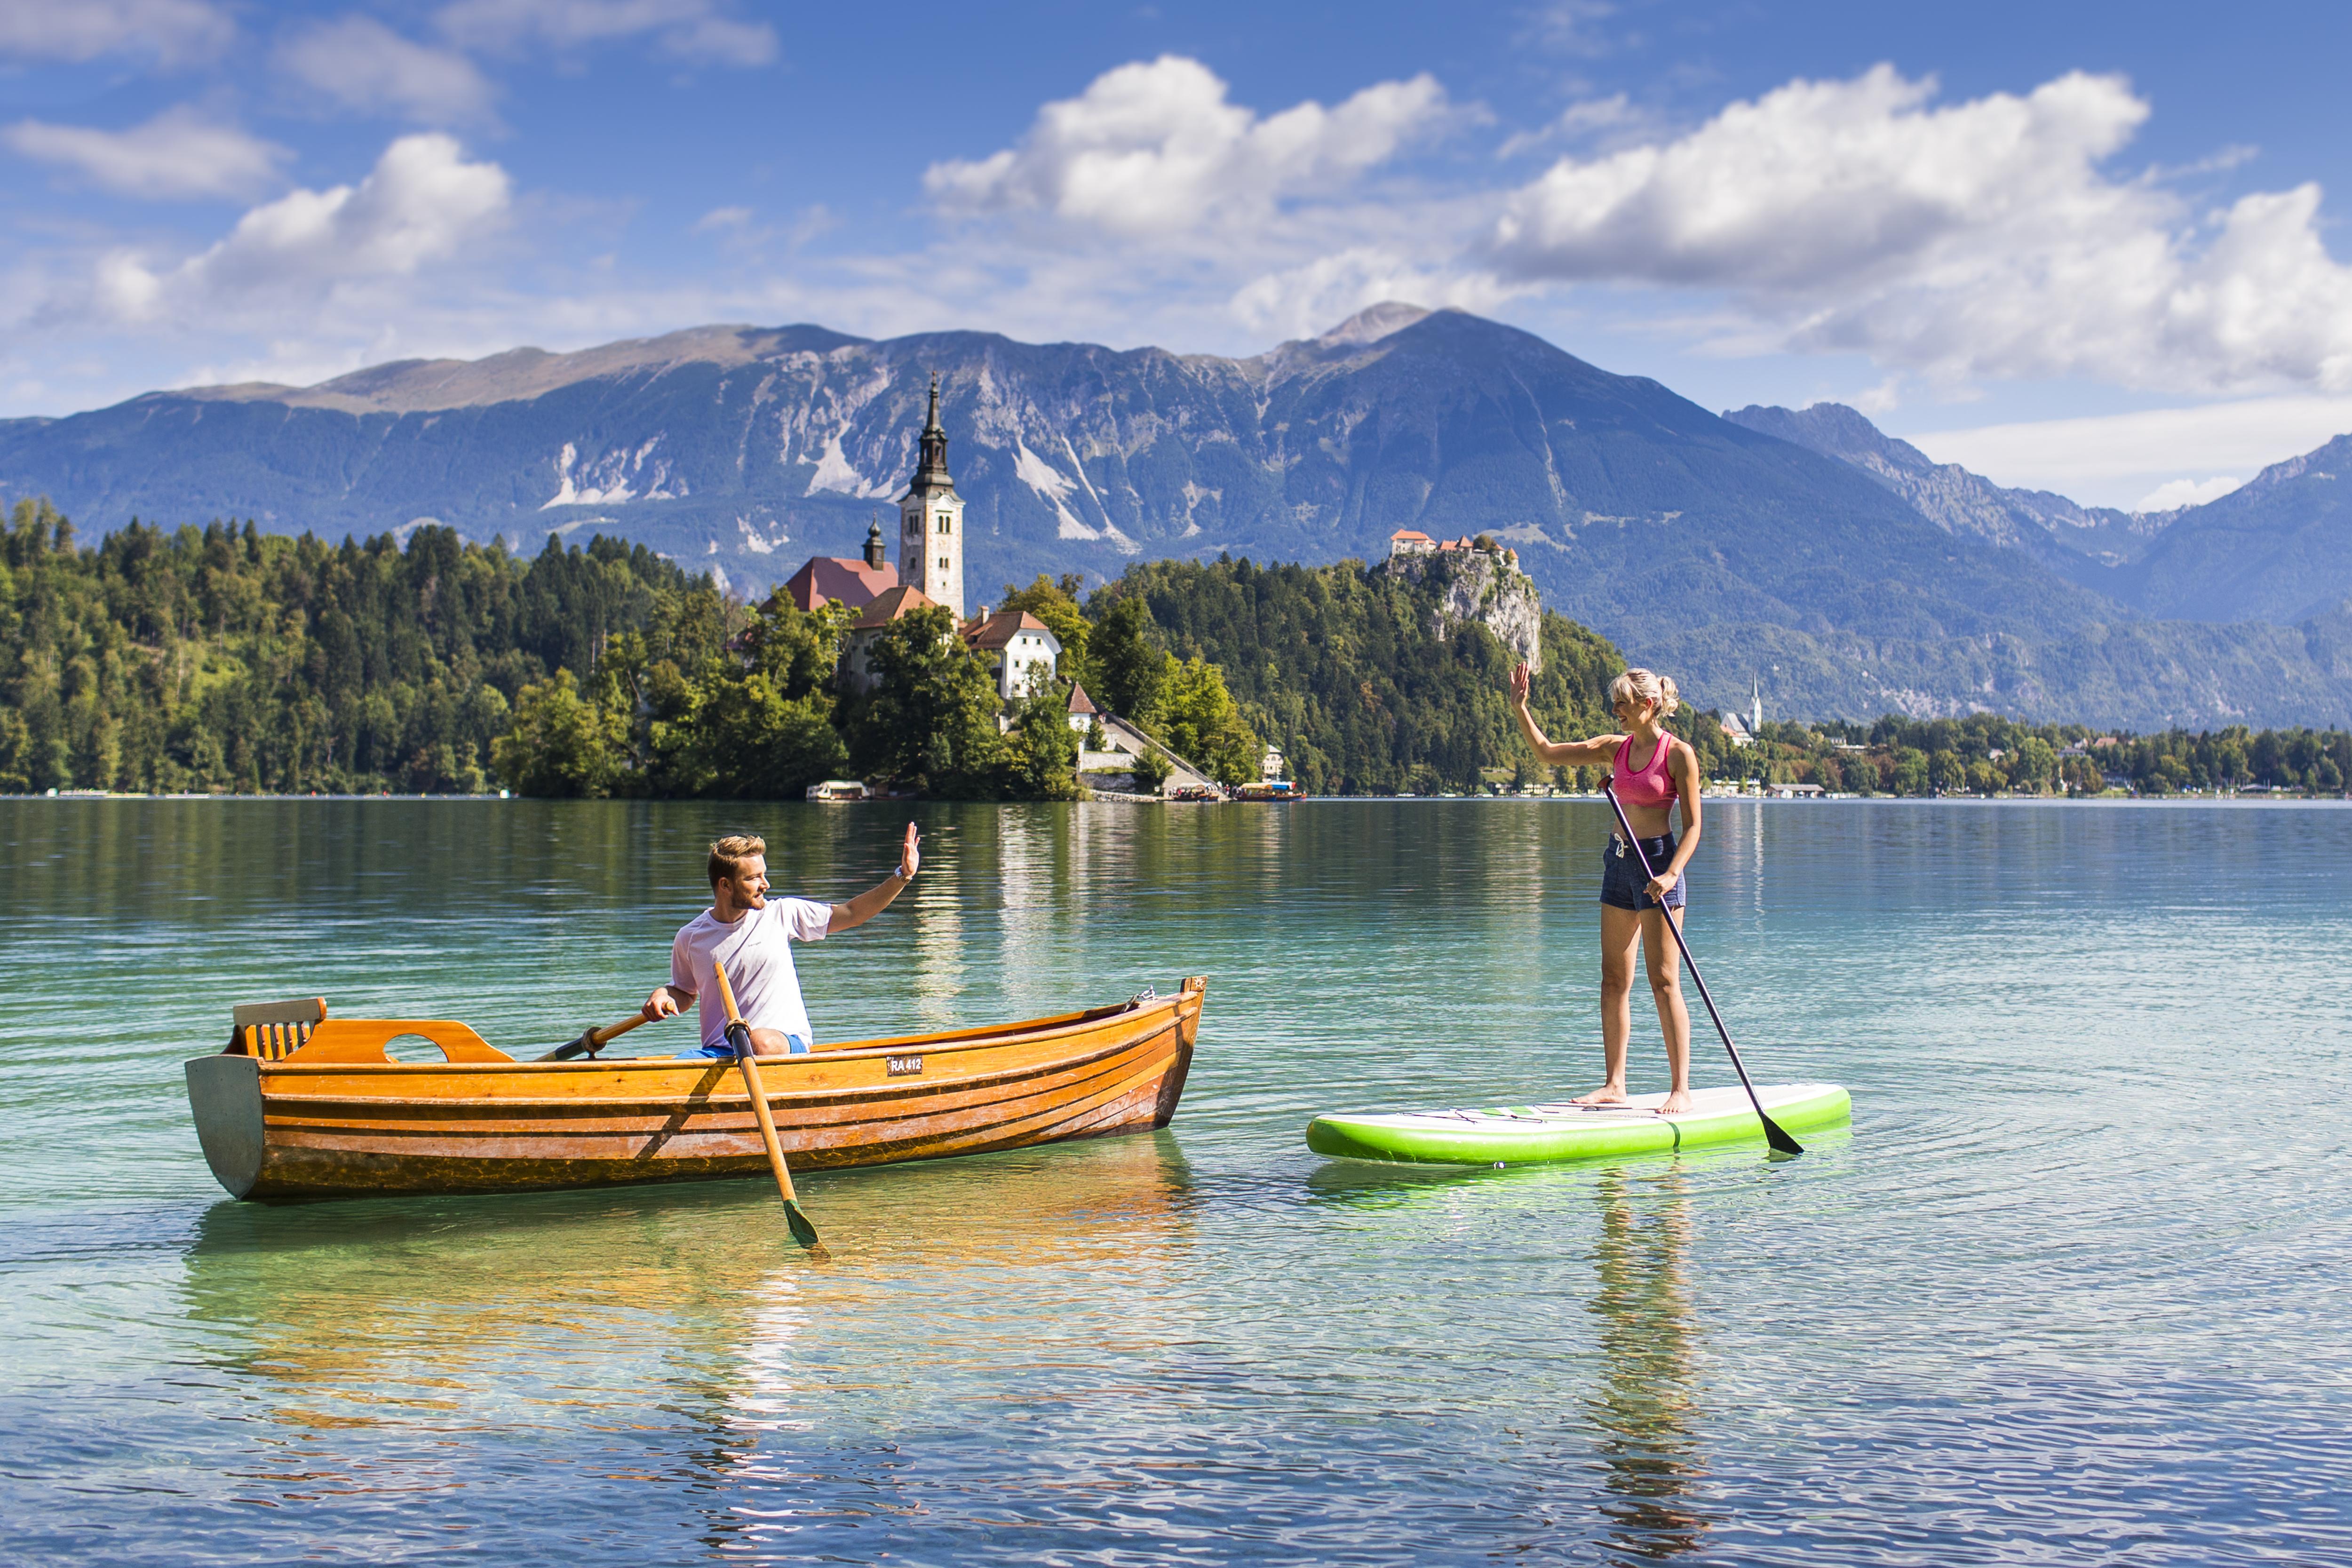 Grand Hotel Toplice - Small Luxury Hotels of the World, Bled